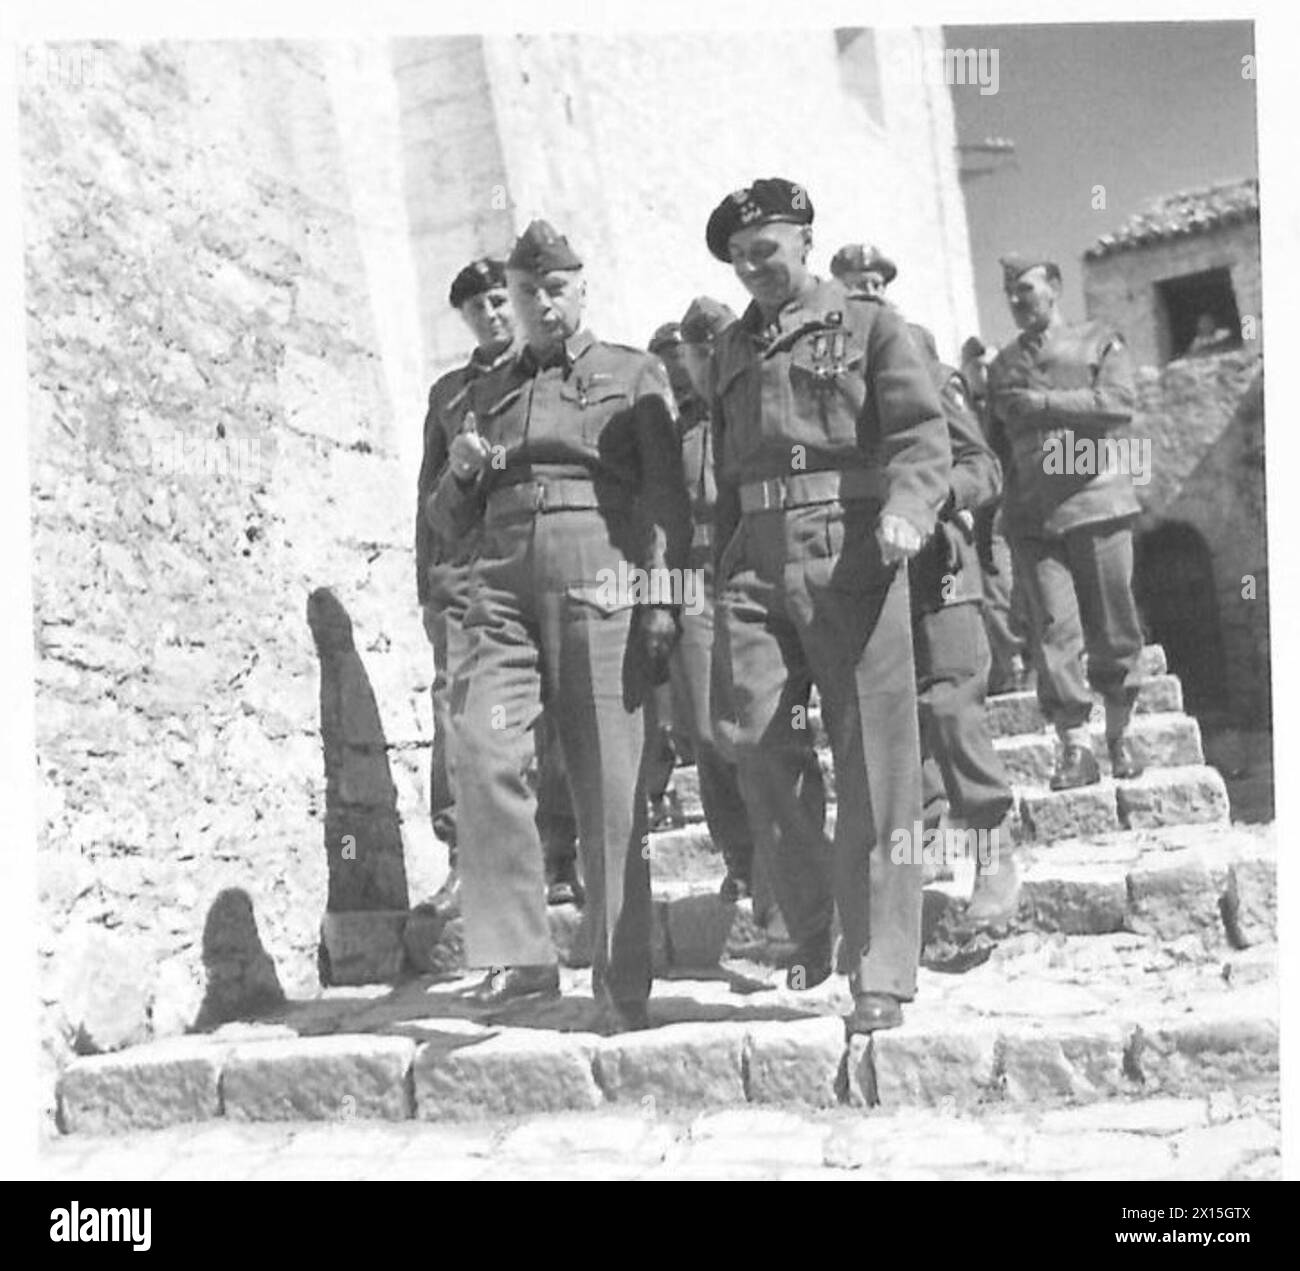 THE POLISH ARMY IN THE ITALIAN CAMPAIGN, 1943-1945 - General Kazimierz Sosnkowski, the C-in-C of the Polish Armed Forces, walking down the stairs with General Władysław Anders, the Commander of the 2nd Polish Corps, at Carpinone after a mass during his visit to the Corps, 2 April 1944 Polish Army, Polish Armed Forces in the West, Polish Corps, II, Polish Armed Forces in the West, Carpathian Rifles Divisior, 3, 8th Army, Sosnkowski, Kazimierz, Anders, Władysław Stock Photo